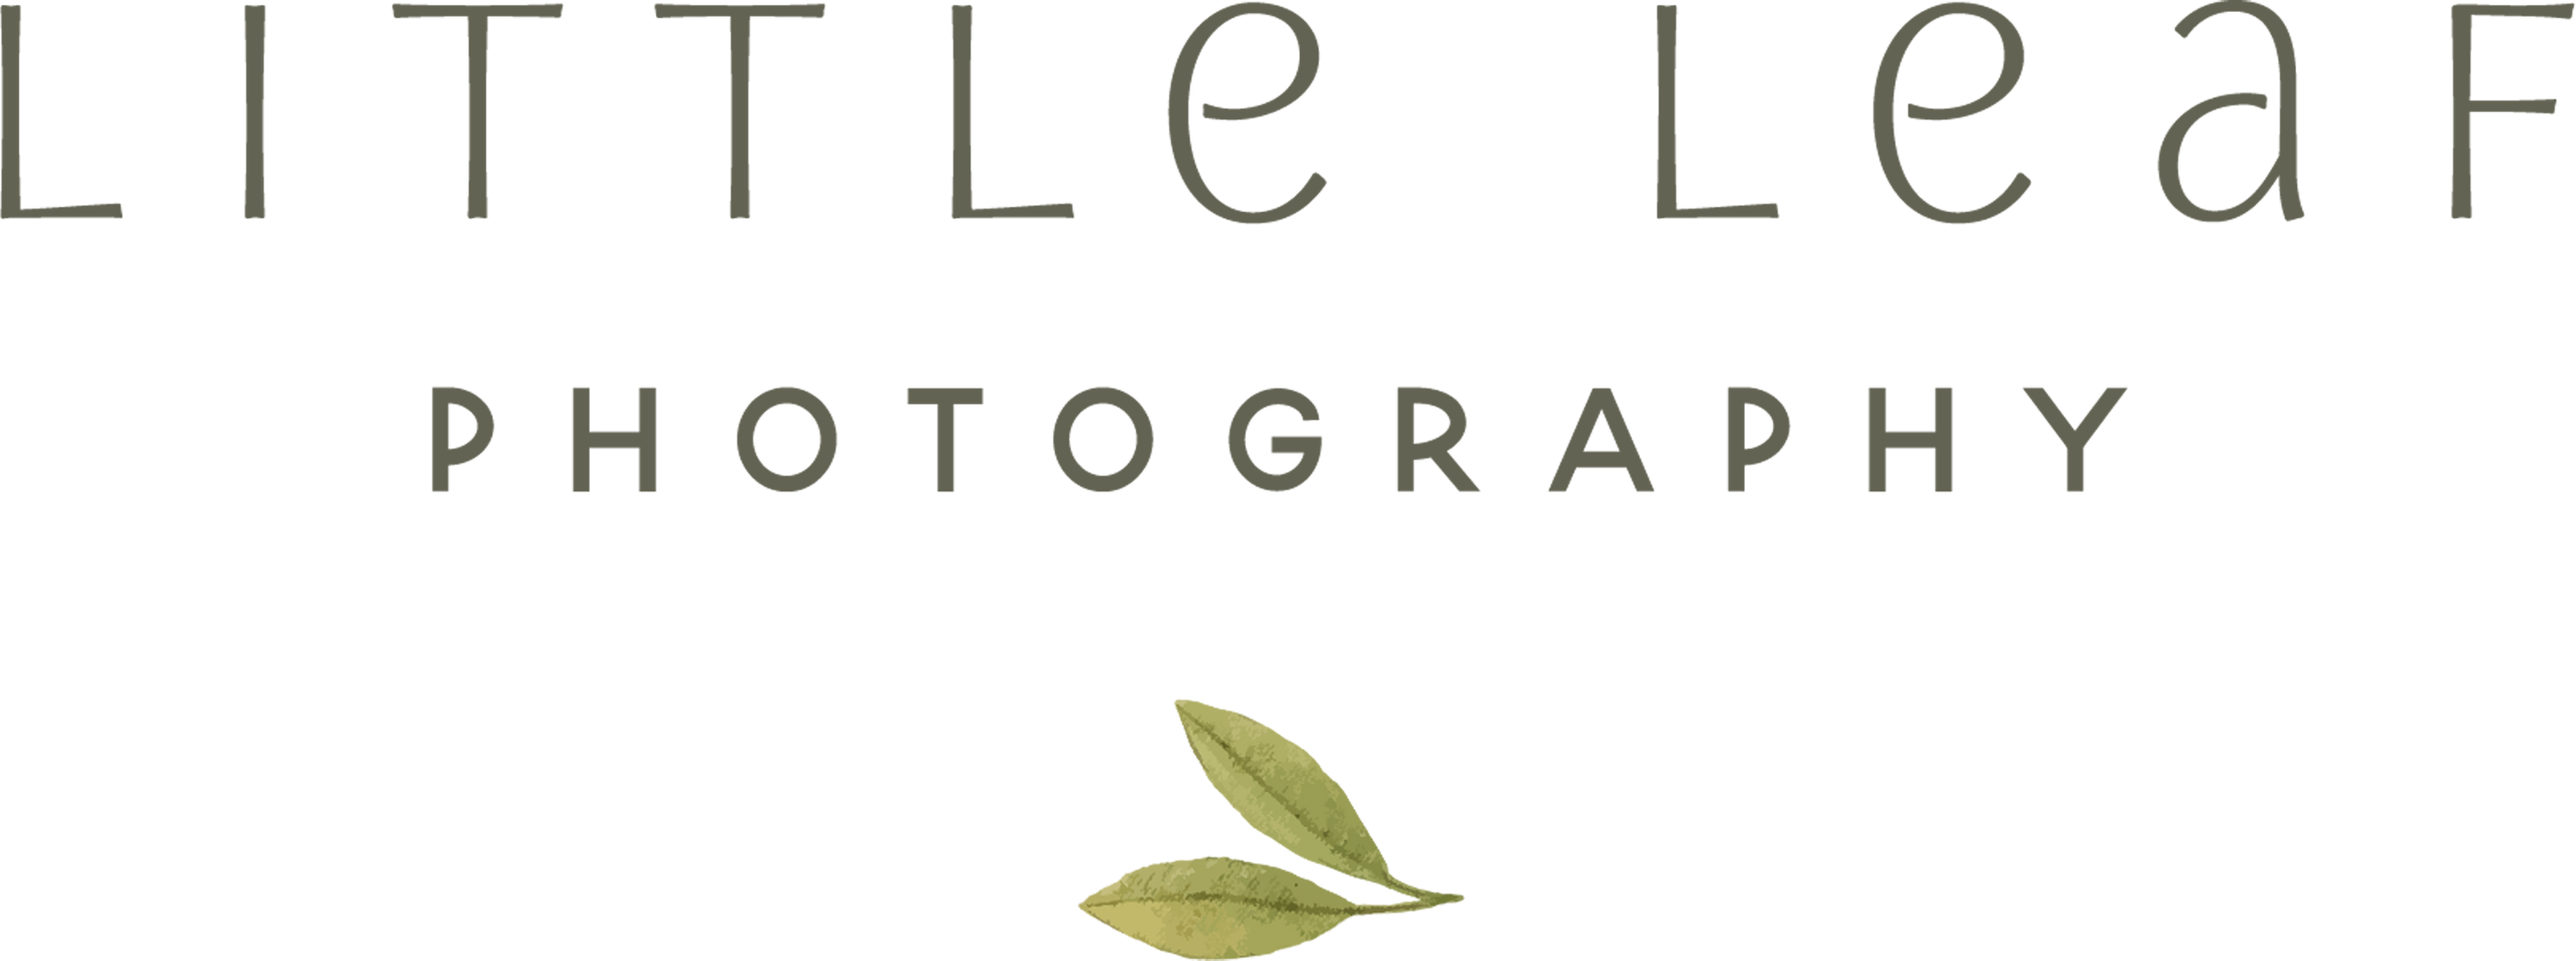 Little Leaf Photography